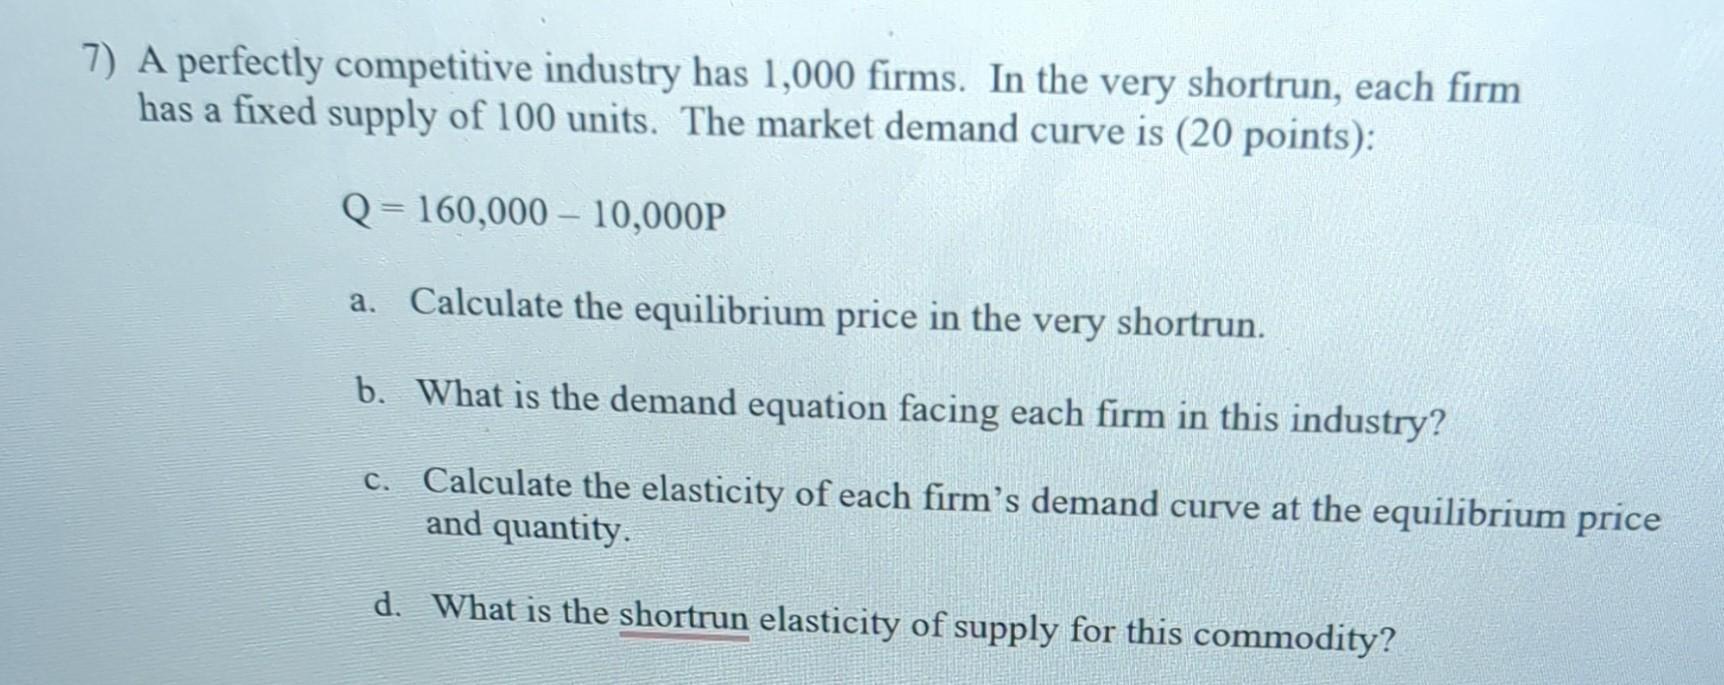 A perfectly competitive industry has 1,000 firms. In the very shortrun, each firm has a fixed supply of 100 units. The market